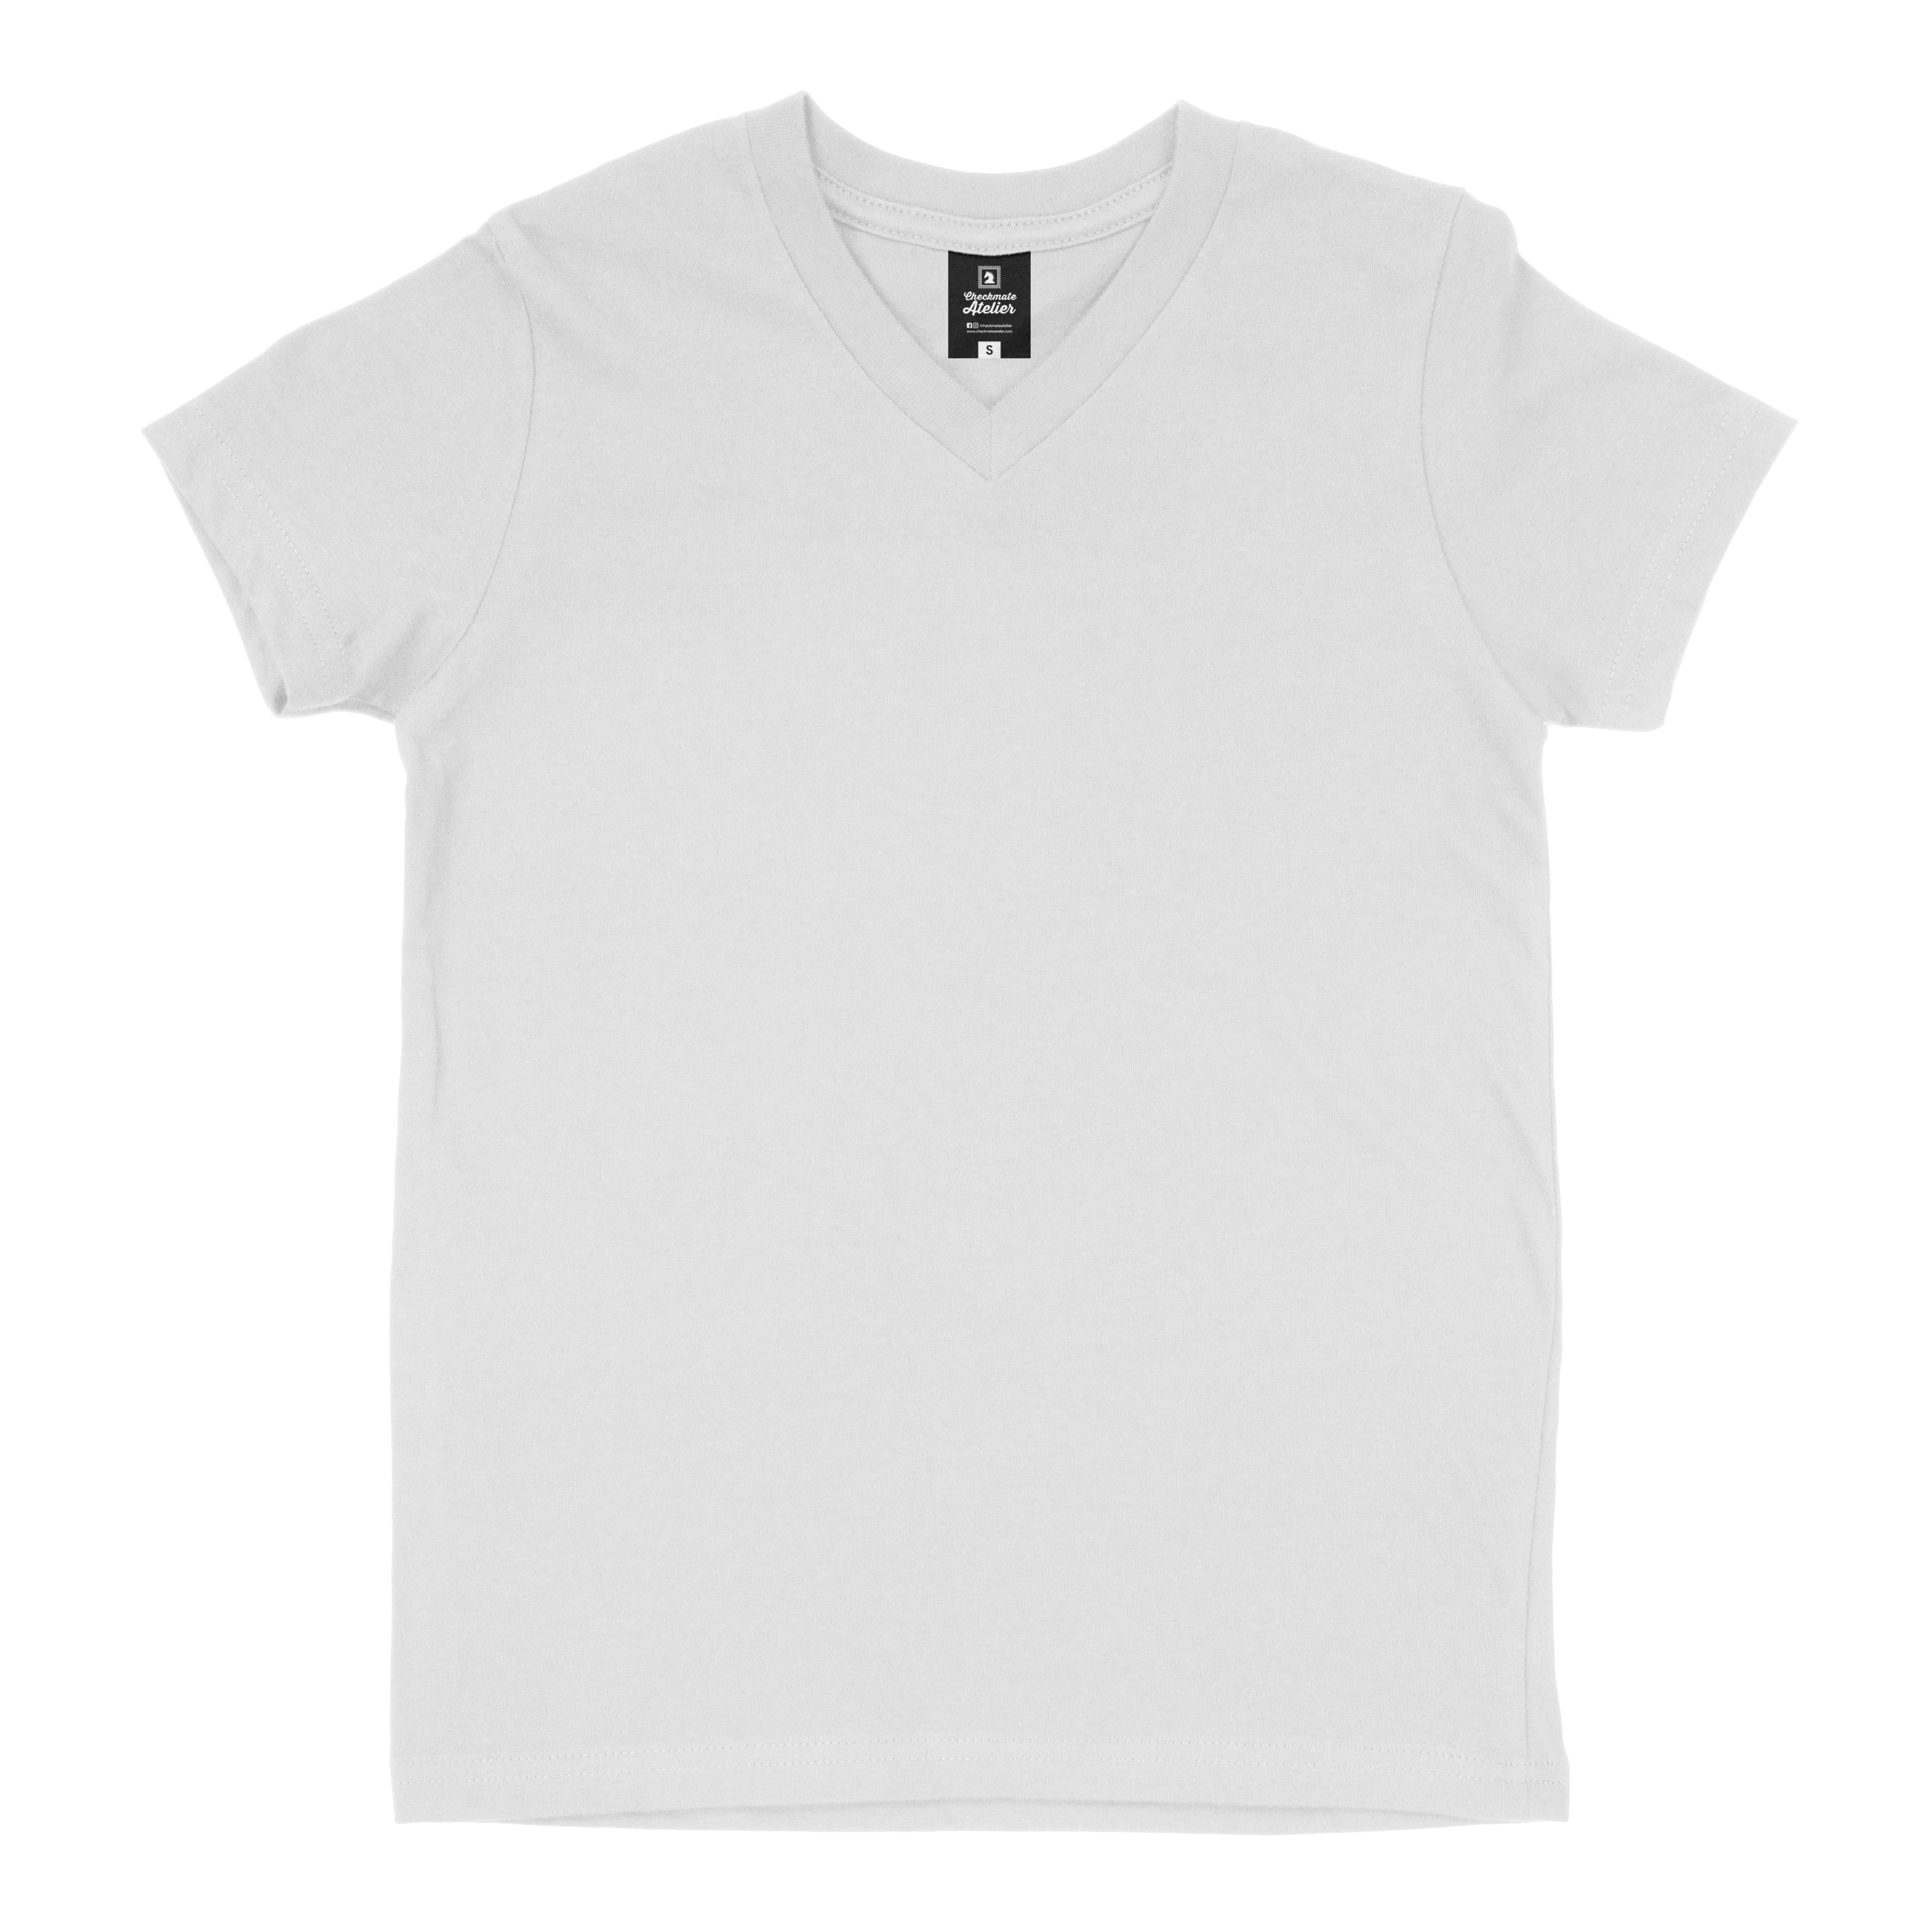 White V-Neck T-Shirt - Shop Now - Checkmate Atelier